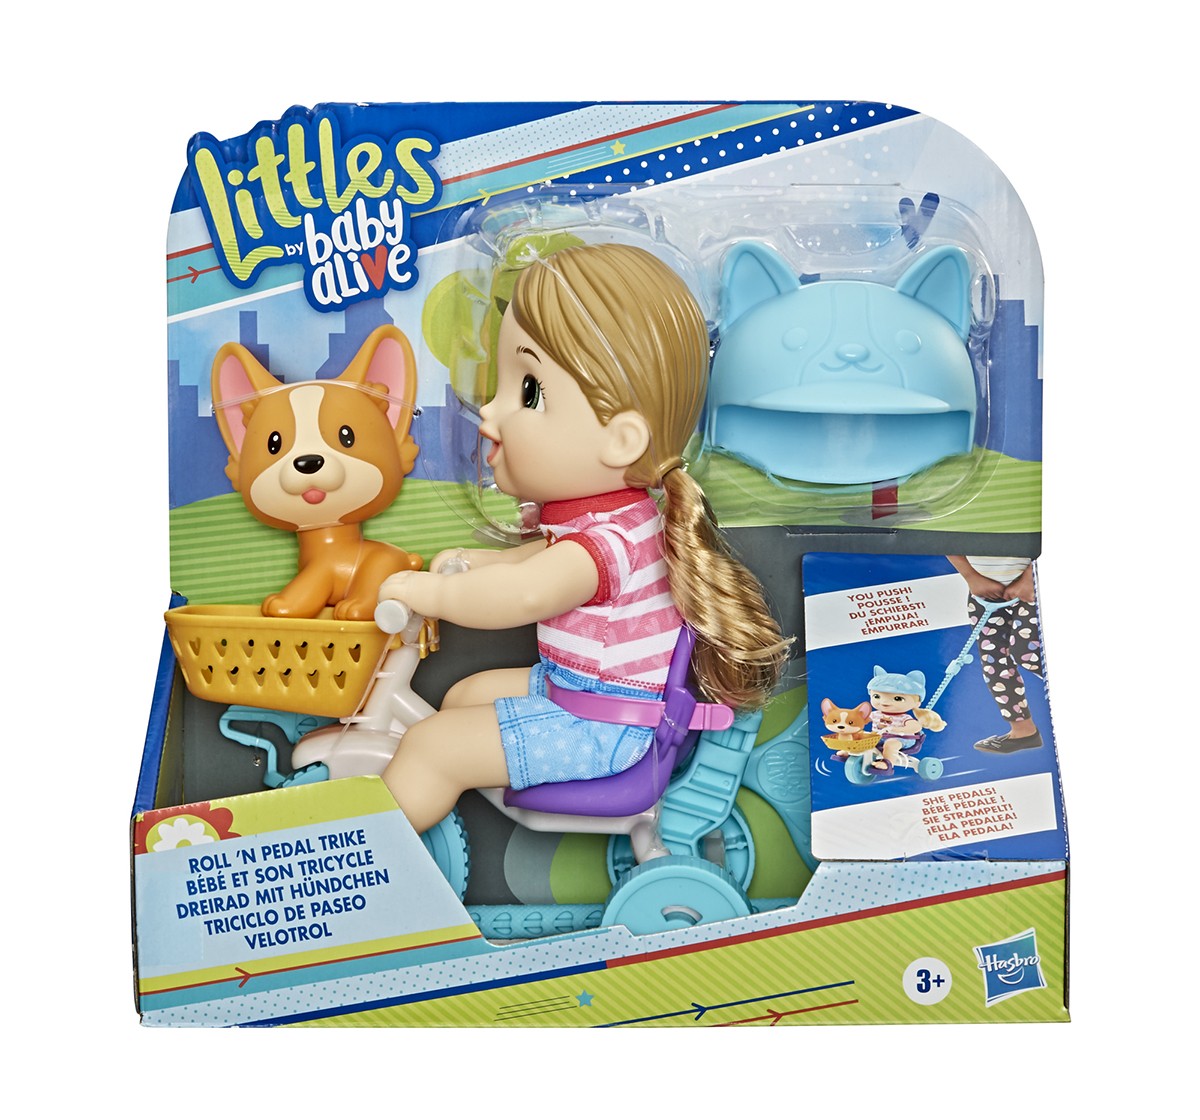 Baby Alive Littles, Roll ‘n Pedal Trike, Doll and Tricycle, 5 Accessories, Toy for Kids 3 Years Old and Up Dolls & Accessories for age 3Y+ 